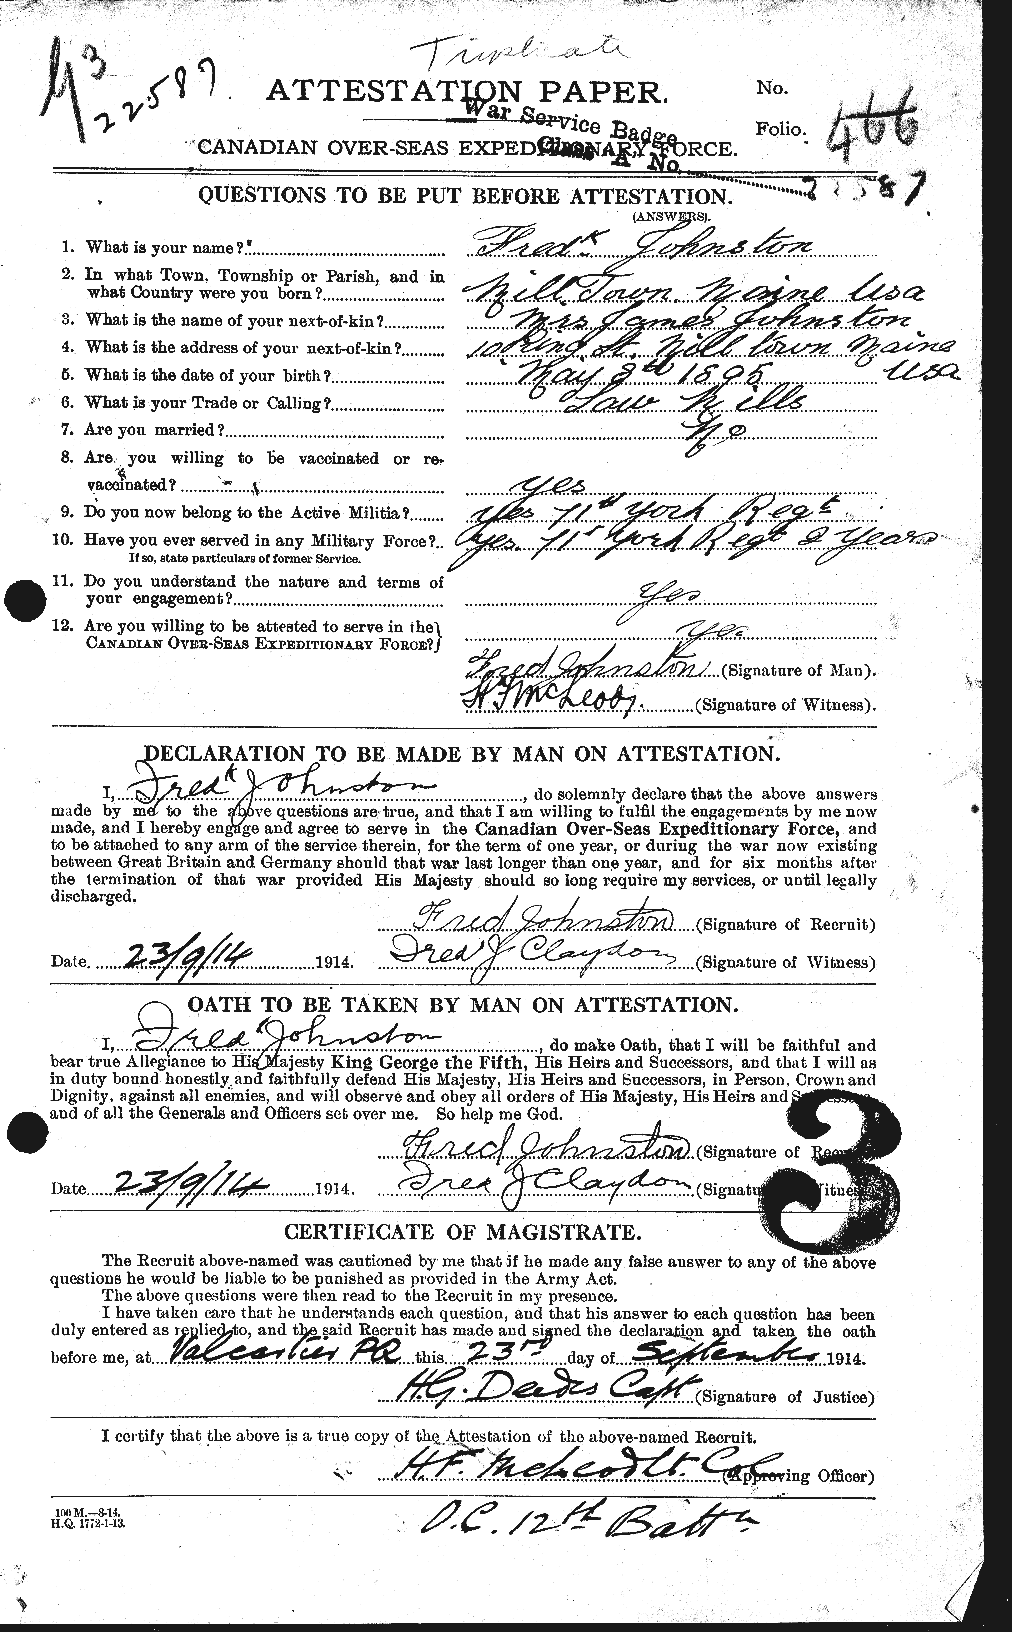 Personnel Records of the First World War - CEF 423290a